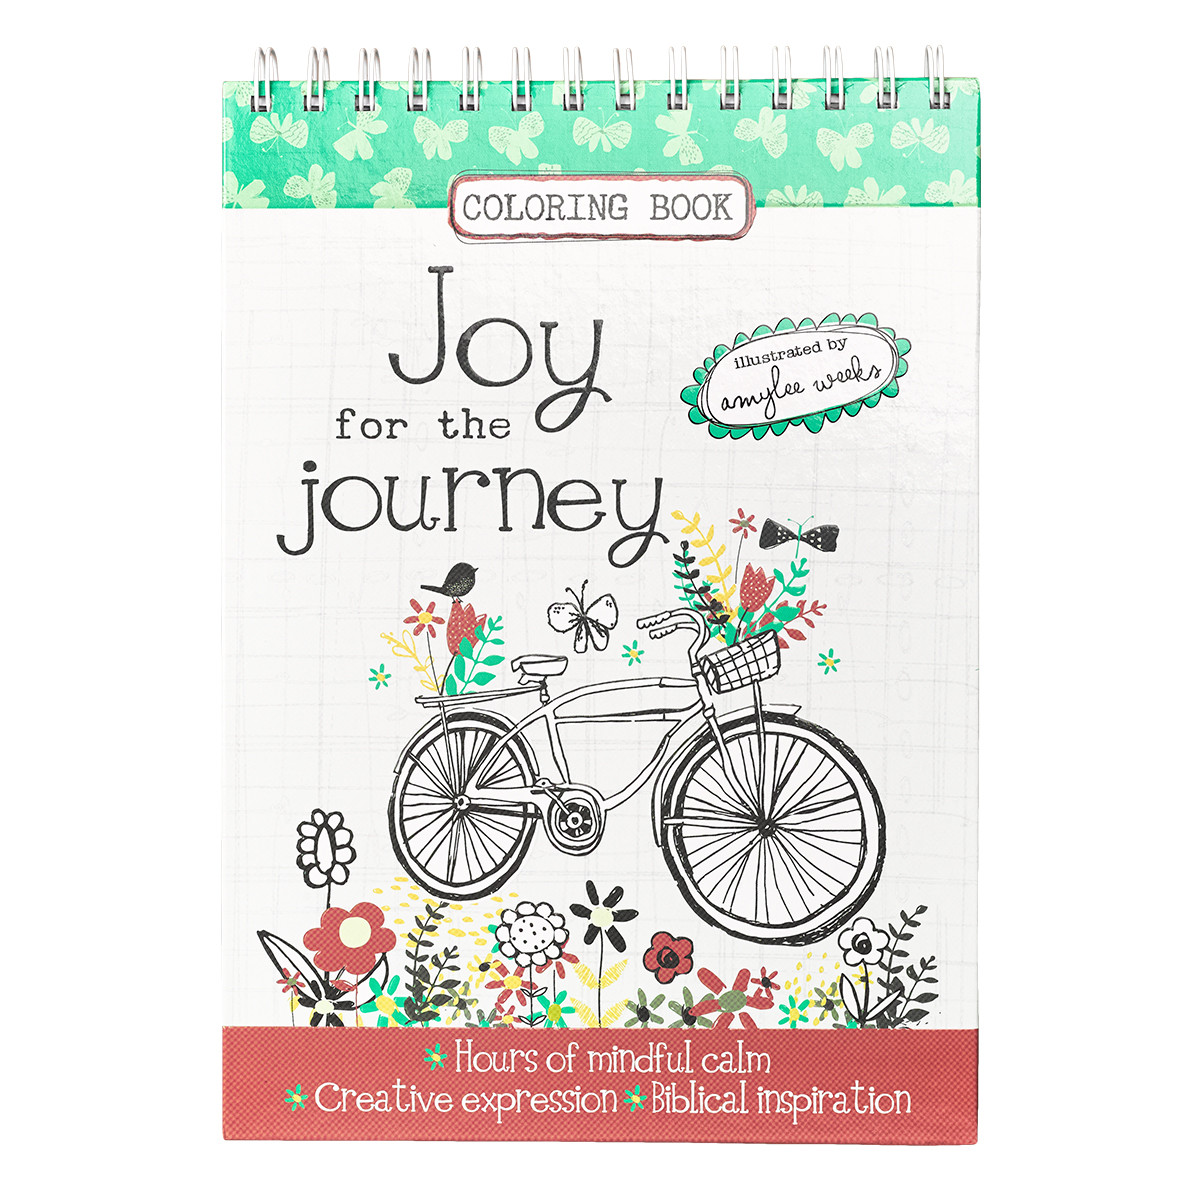 JOY FOR THE JOURNEY COLOURING BOOK